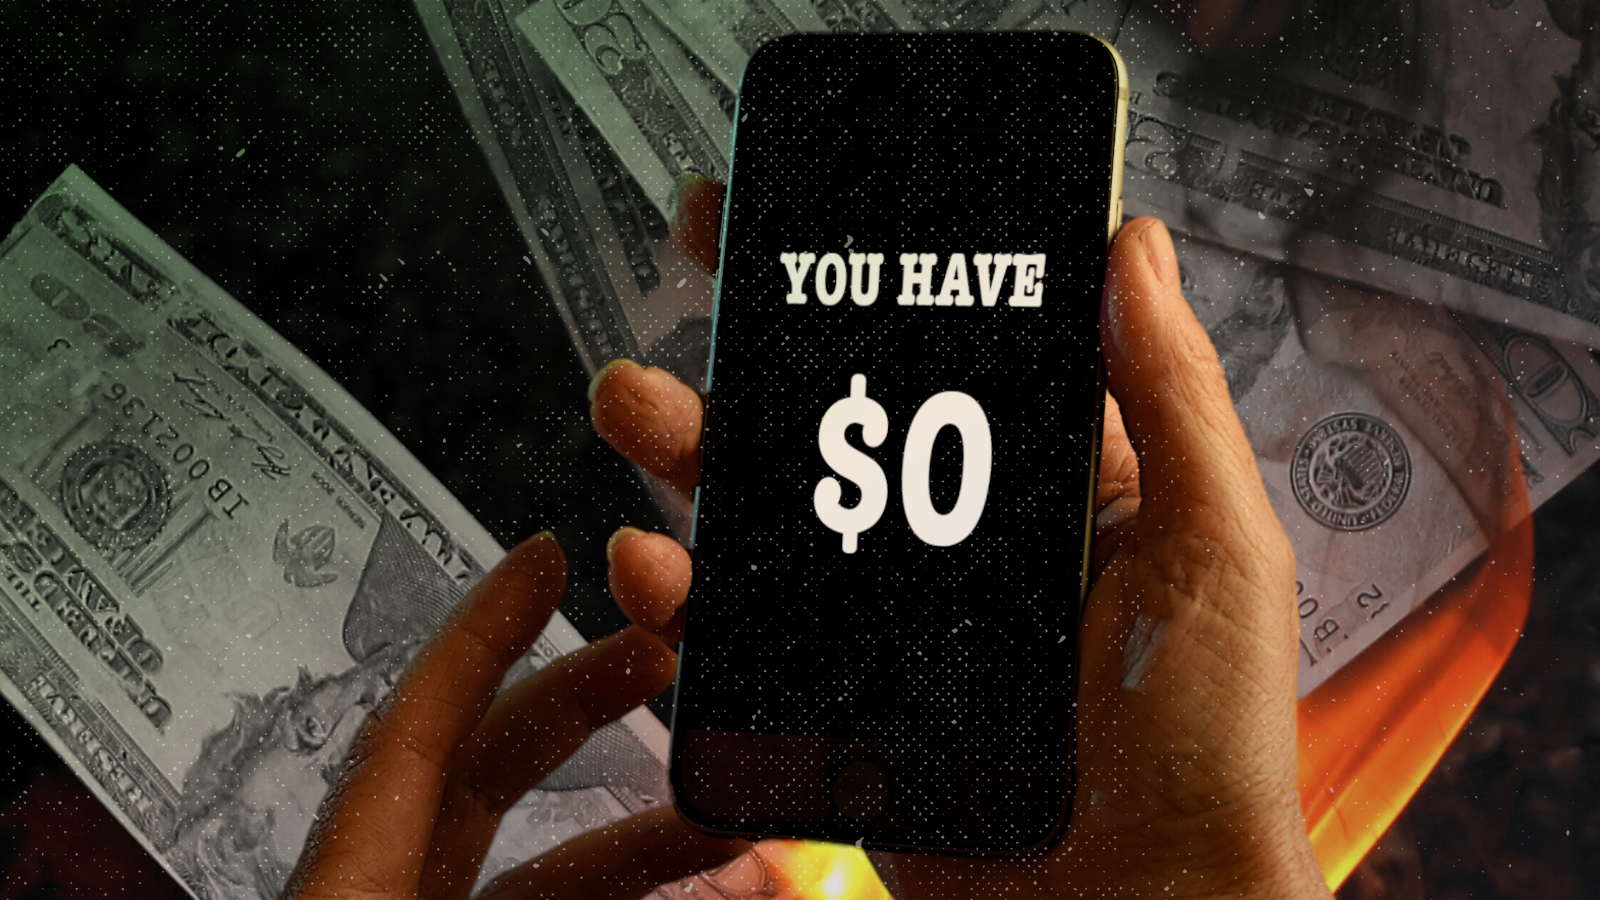 A hand holds a phone showing $0 on the screen, overlaid on an image of burning money.